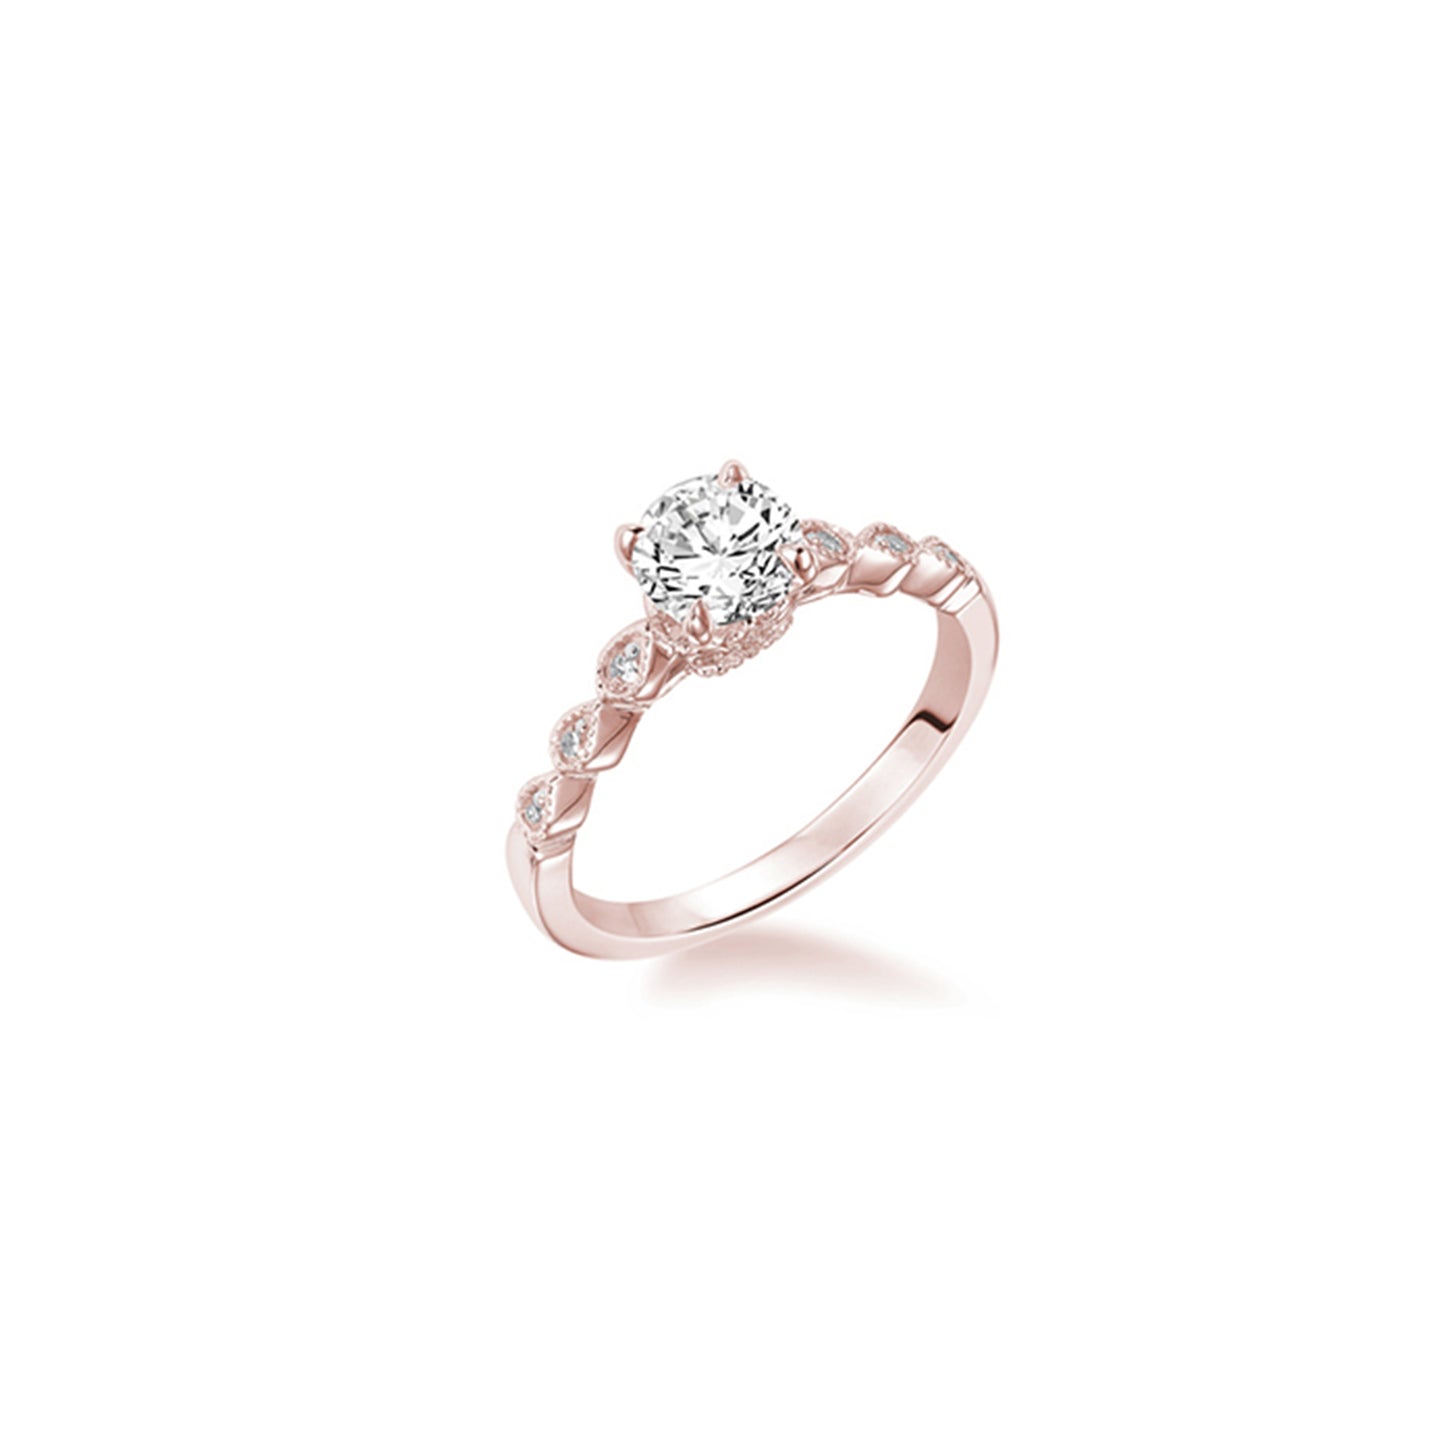 Fink's Exclusive 14K Rose Gold Round Diamond Engagement Ring with a Marquise Shape Design Shank